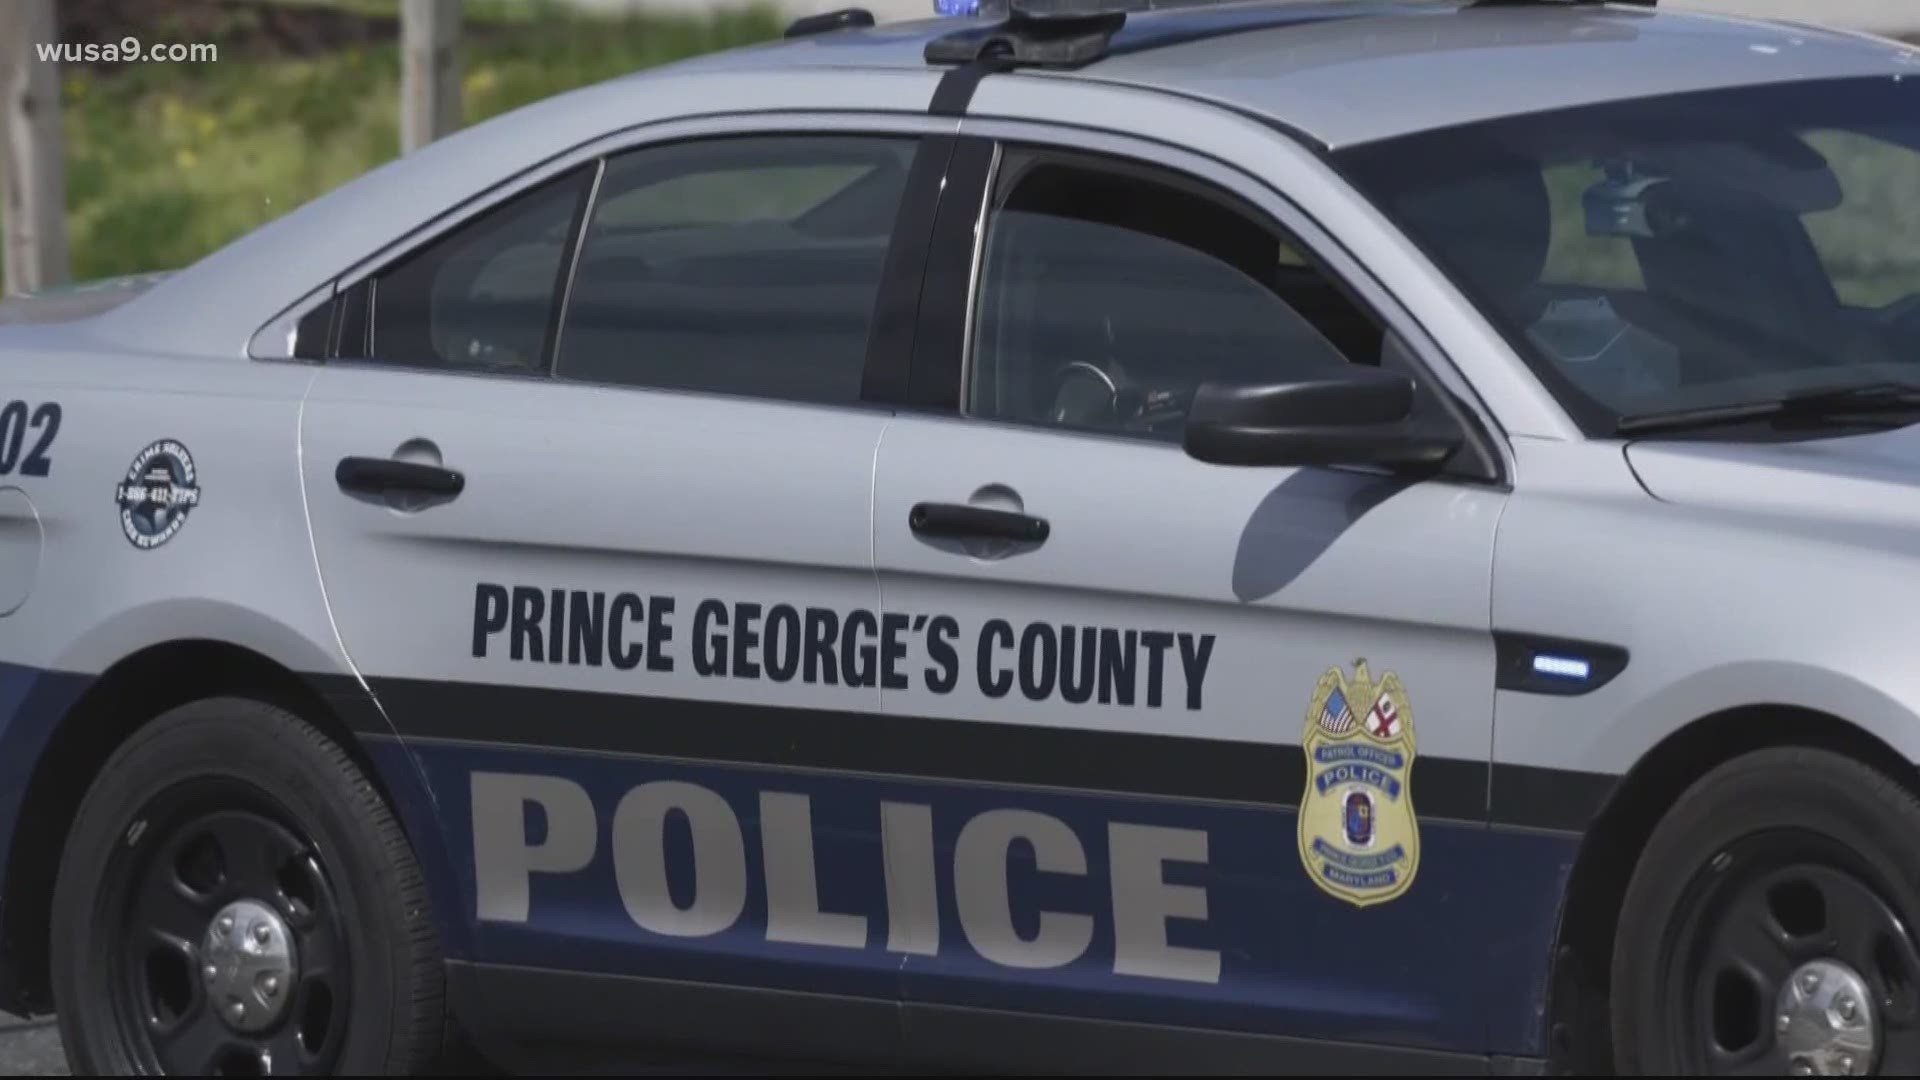 Prince George's County Maryland Police Patrol Car Decals 18 scale